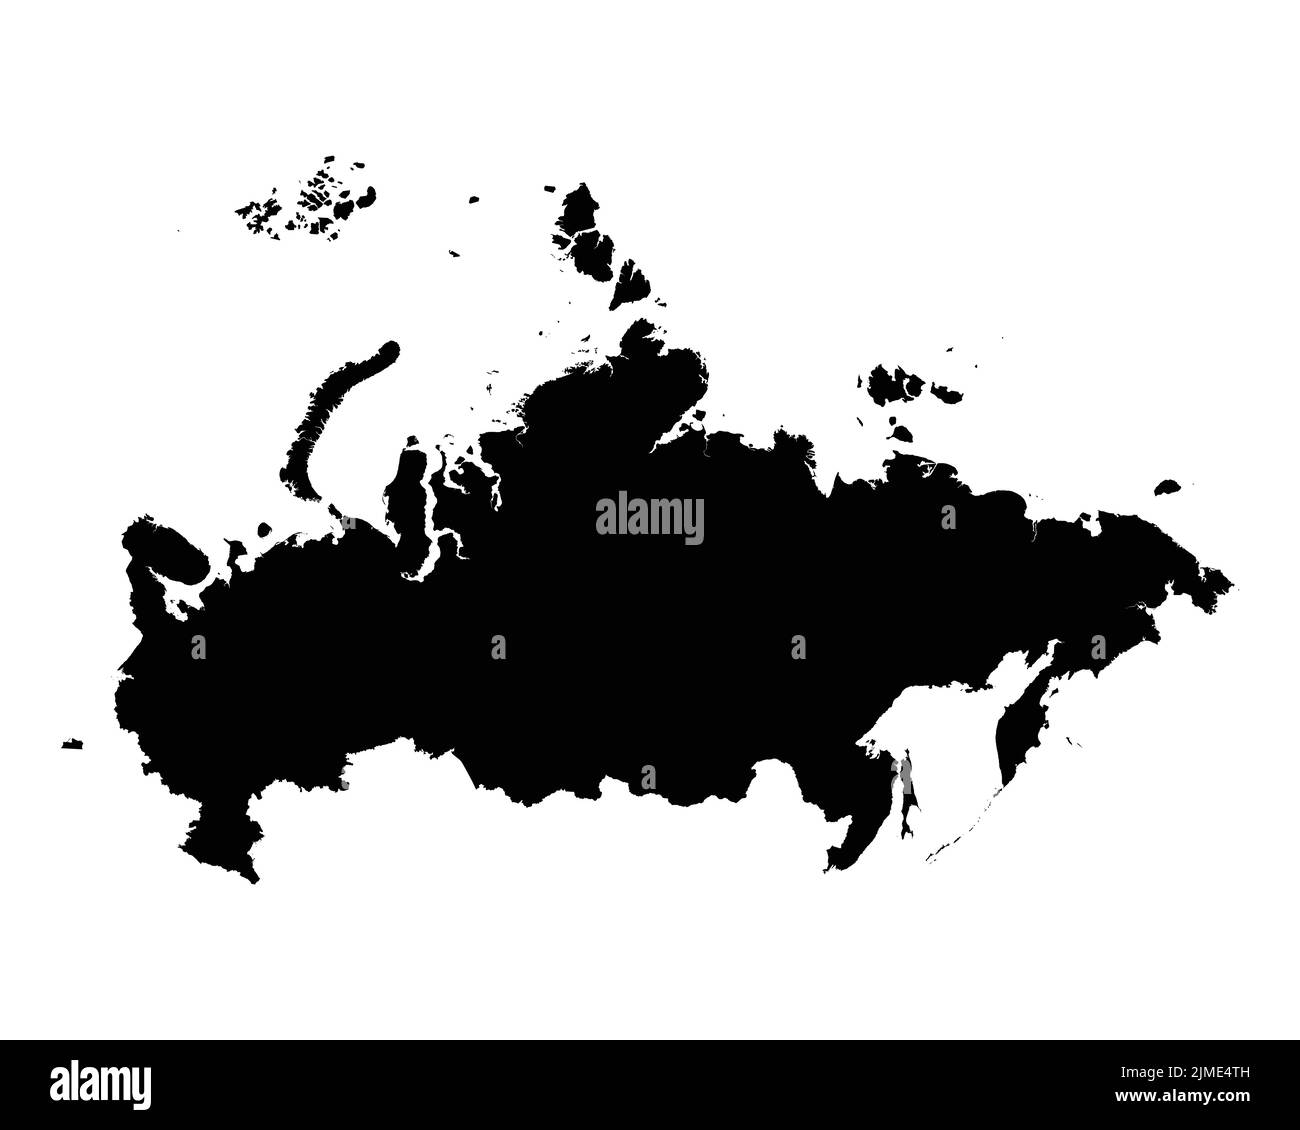 Russia Map. Russian Country Map. Black and White National Nation Geography Outline Border Boundary Territory Shape Vector Illustration EPS Clipart Stock Vector